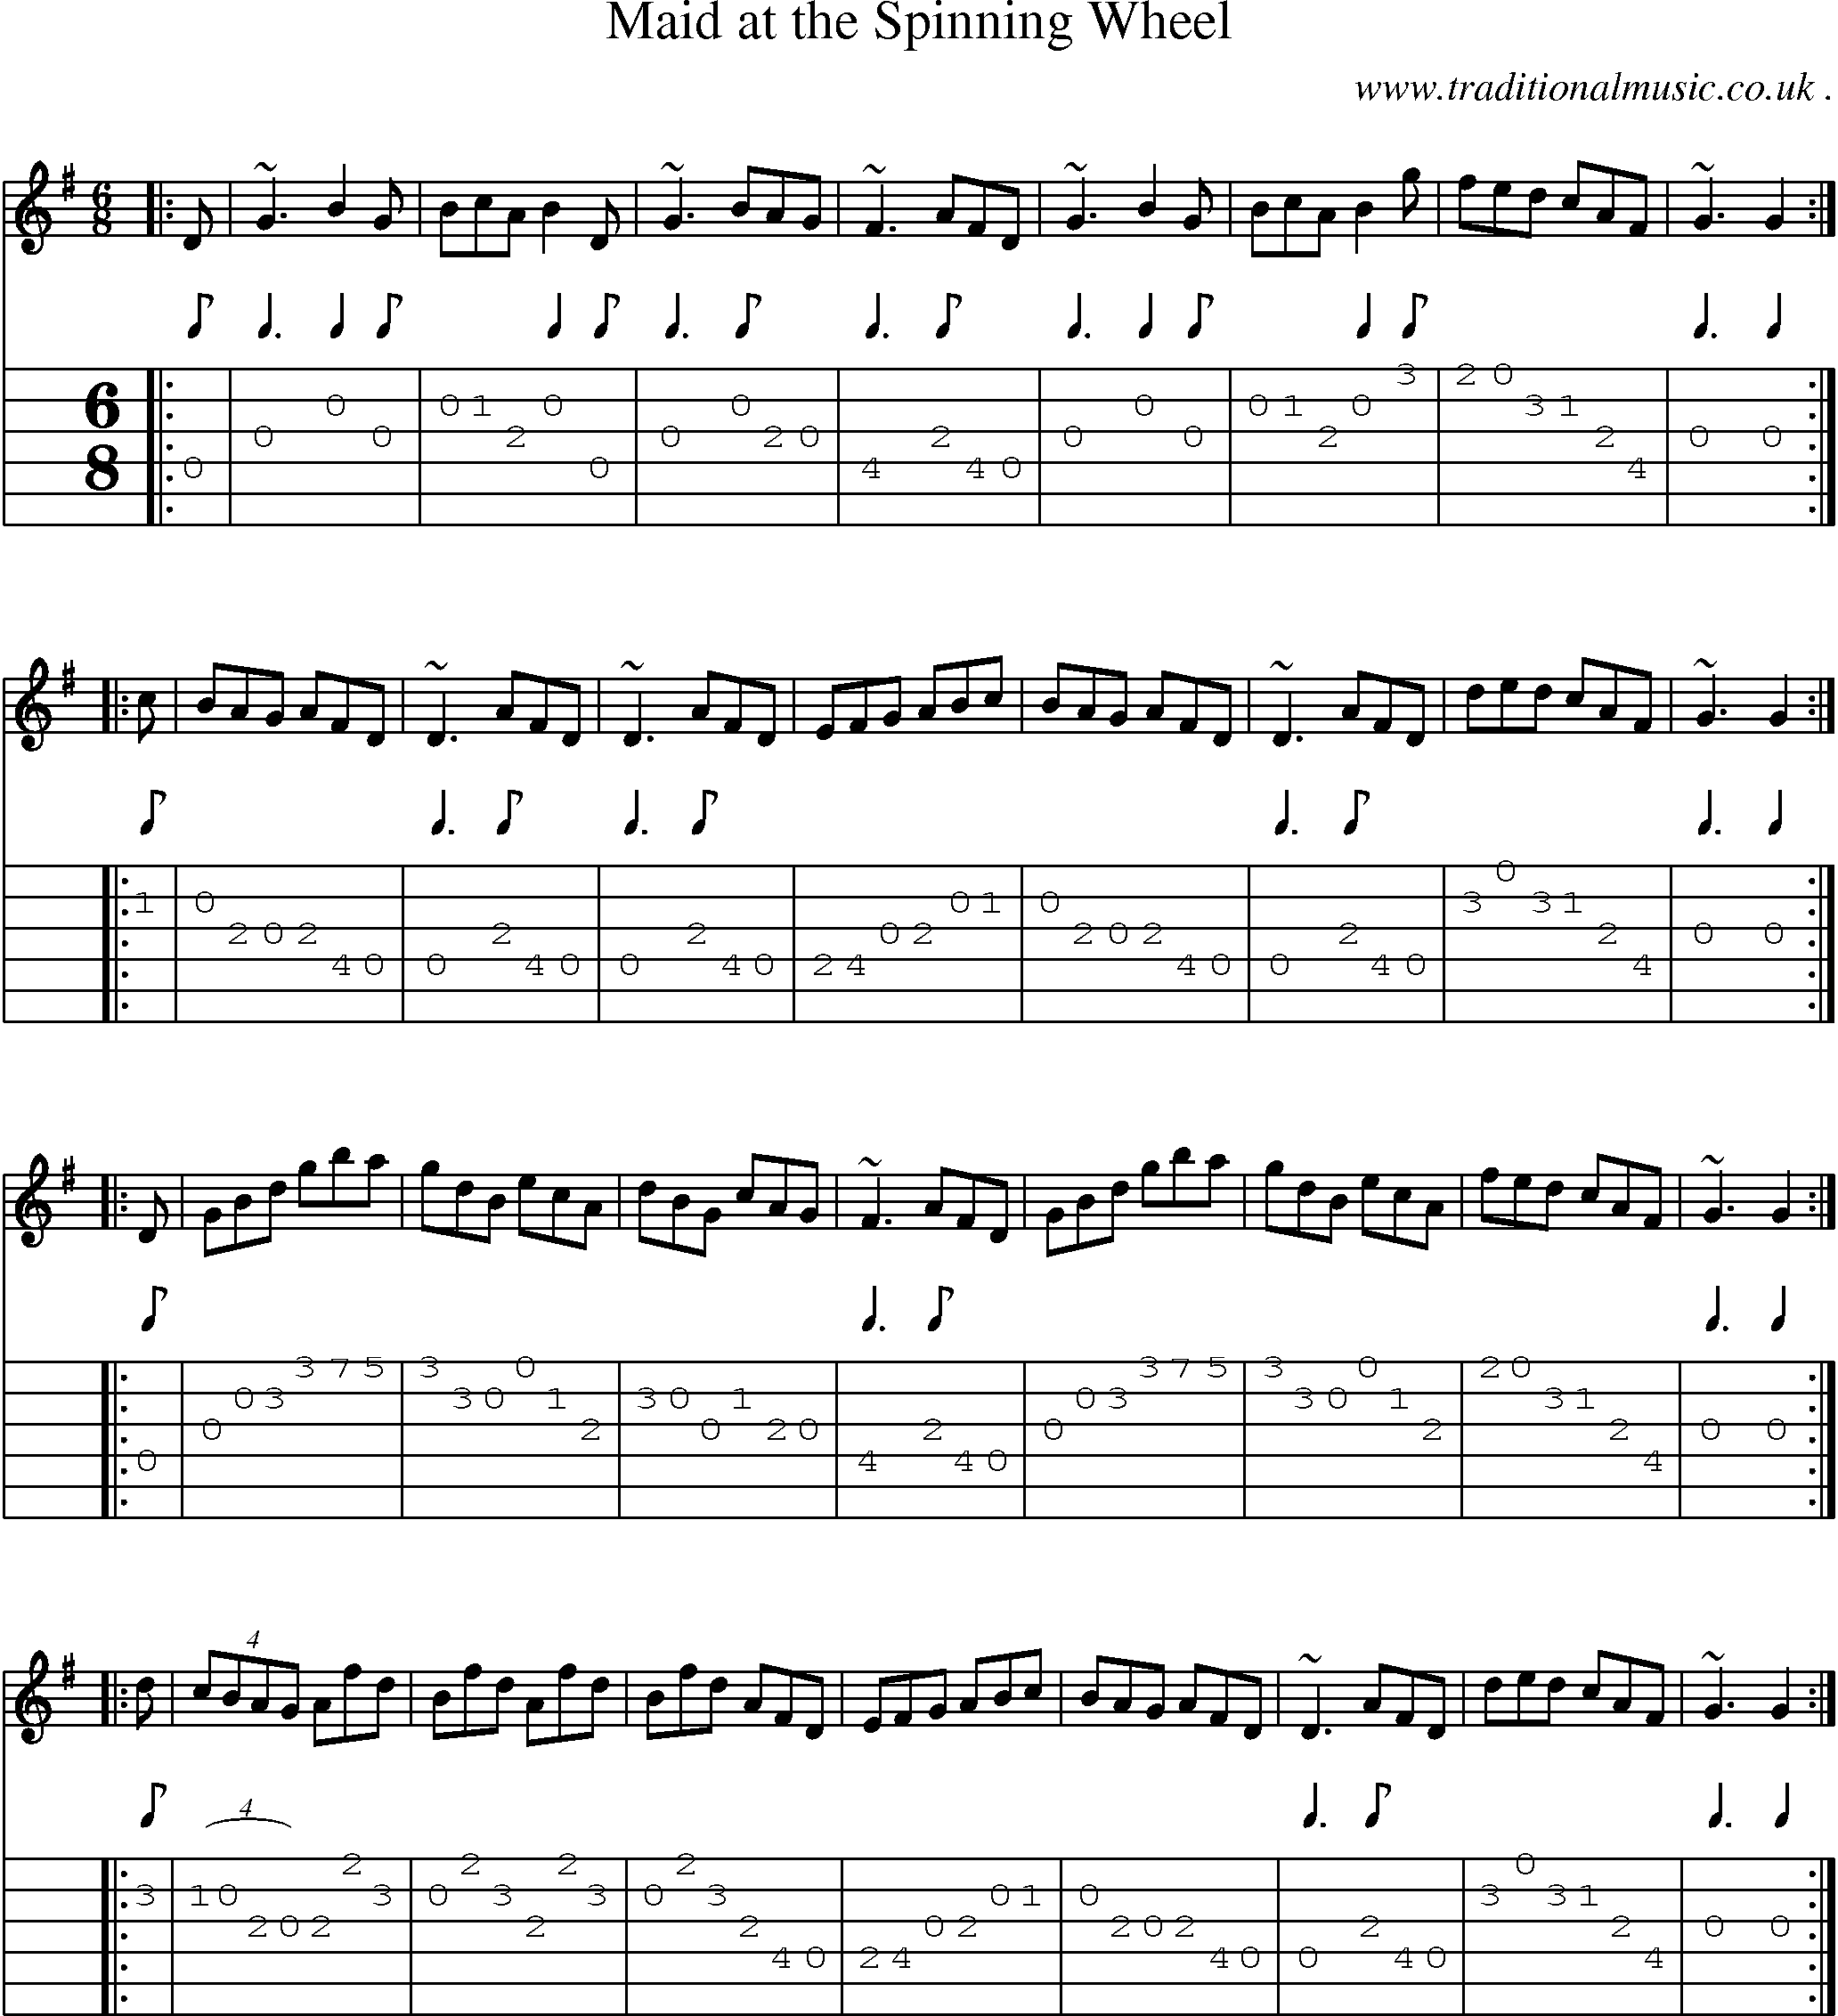 Sheet-music  score, Chords and Guitar Tabs for Maid At The Spinning Wheel